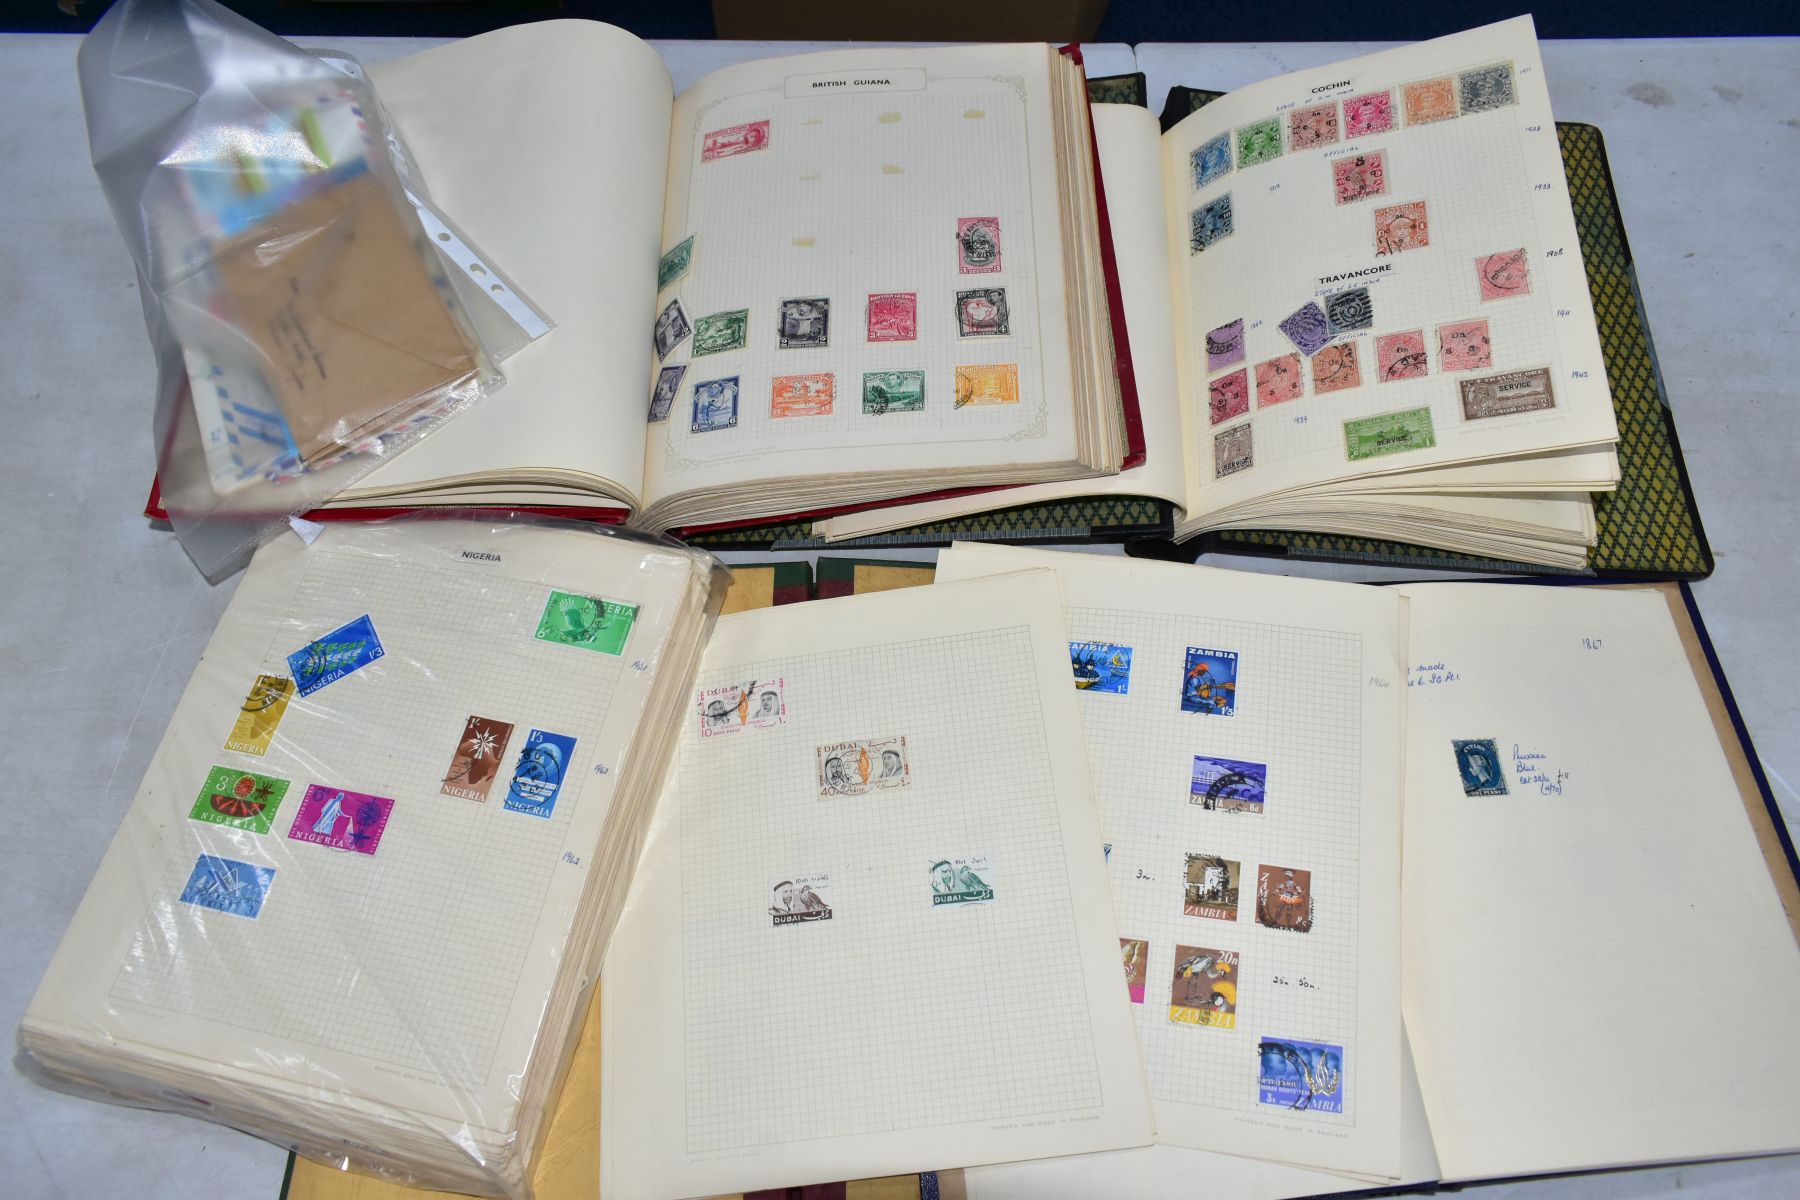 EARLY TO MID PERIOD COMMONWEALTH collection of stamps with an emphasis on British Asia and East